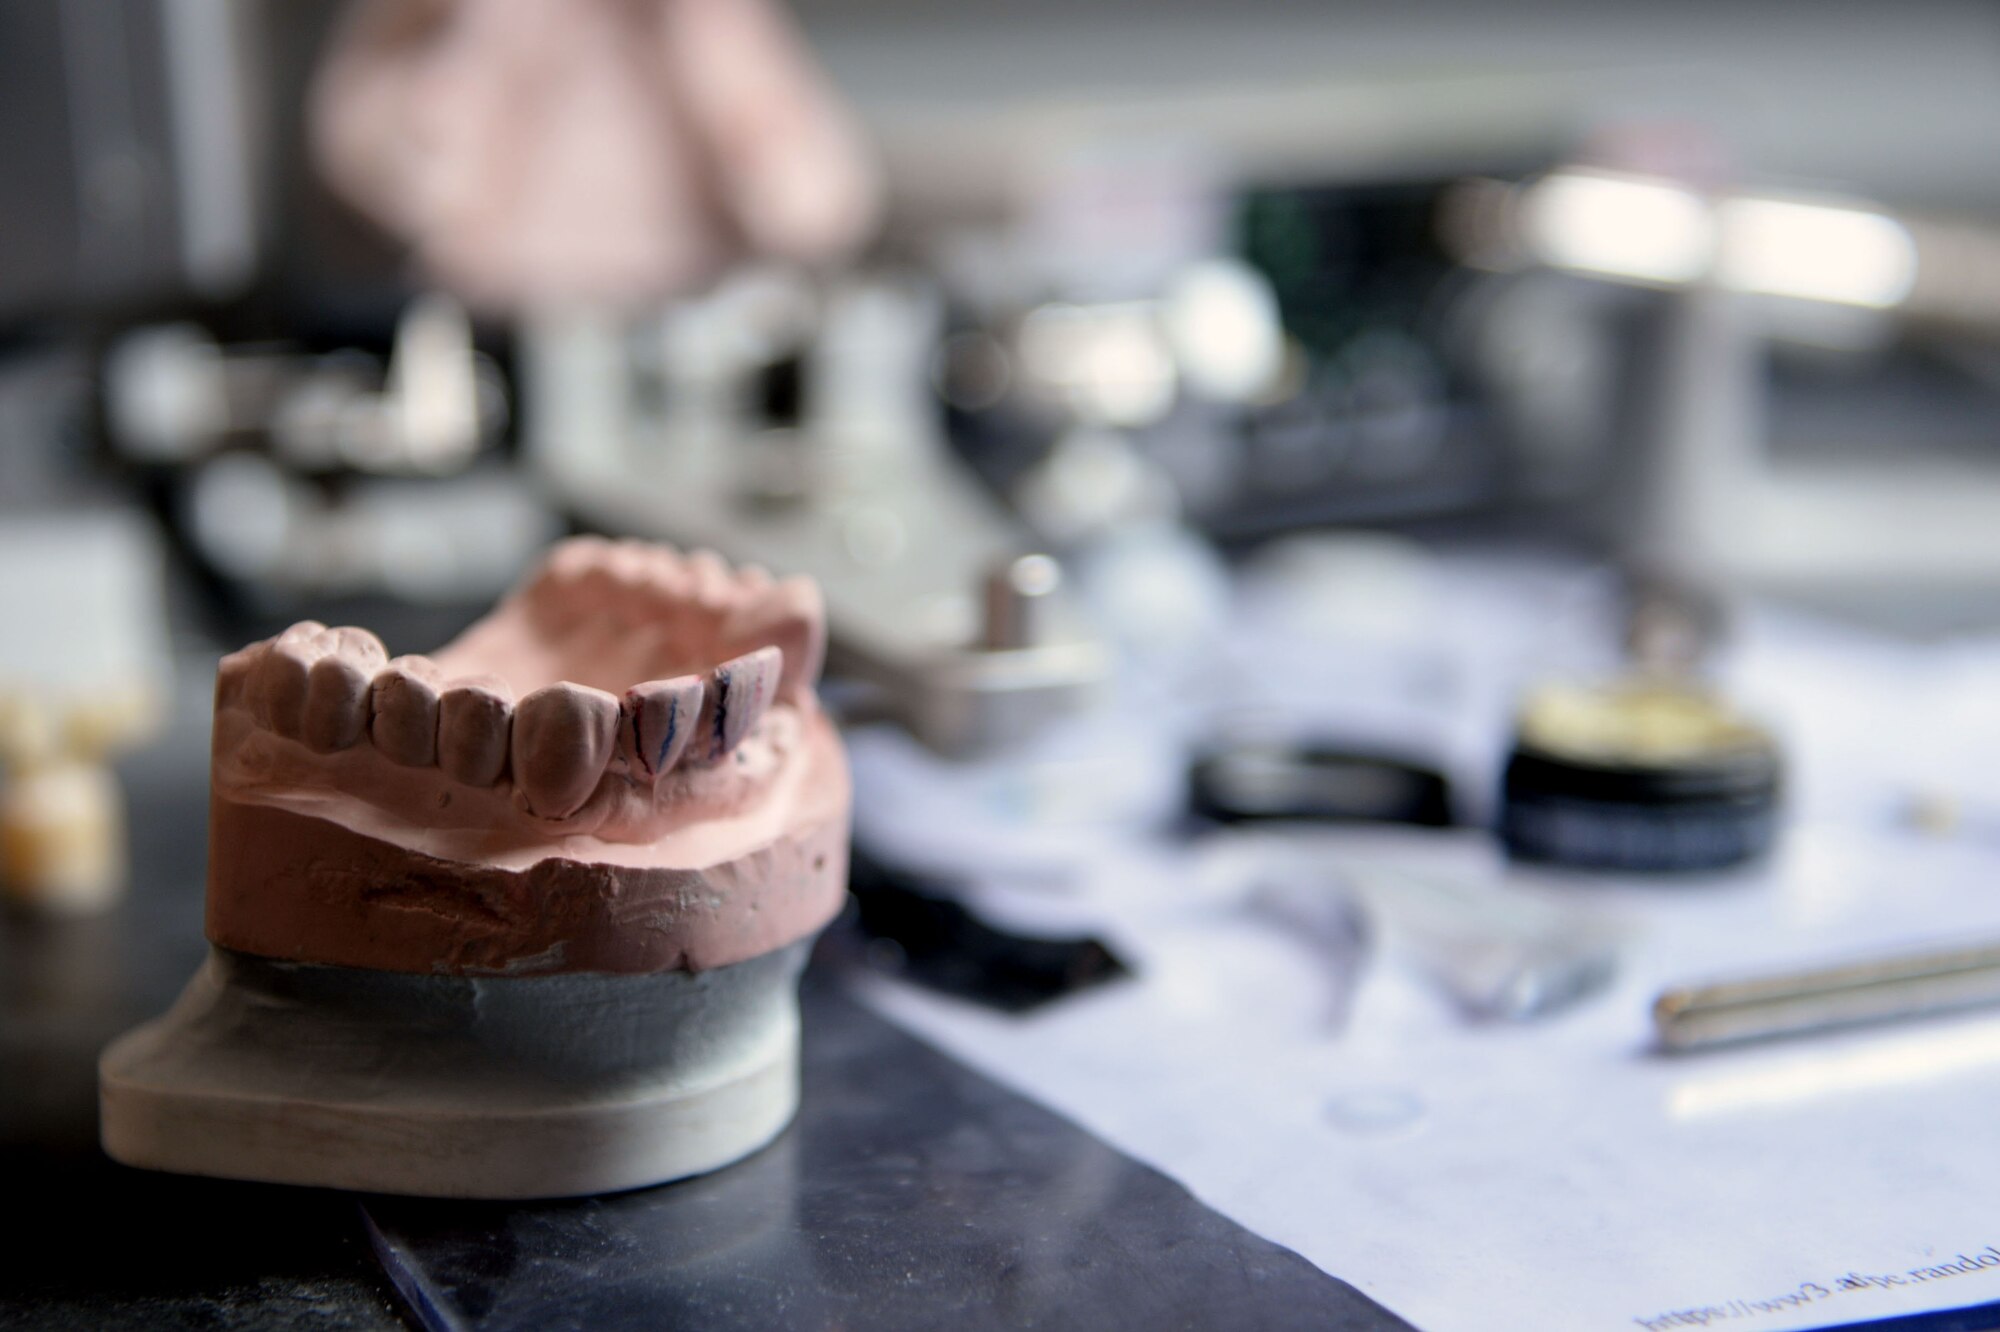 A dental mold stands on the work area of a dental laboratory technician at Spangdahlem Air Base, Germany, April 23, 2014. The mold was used to match a crown fitting for a patient. (U.S. Air Force photo by Senior Airman Alexis Siekert/Released)